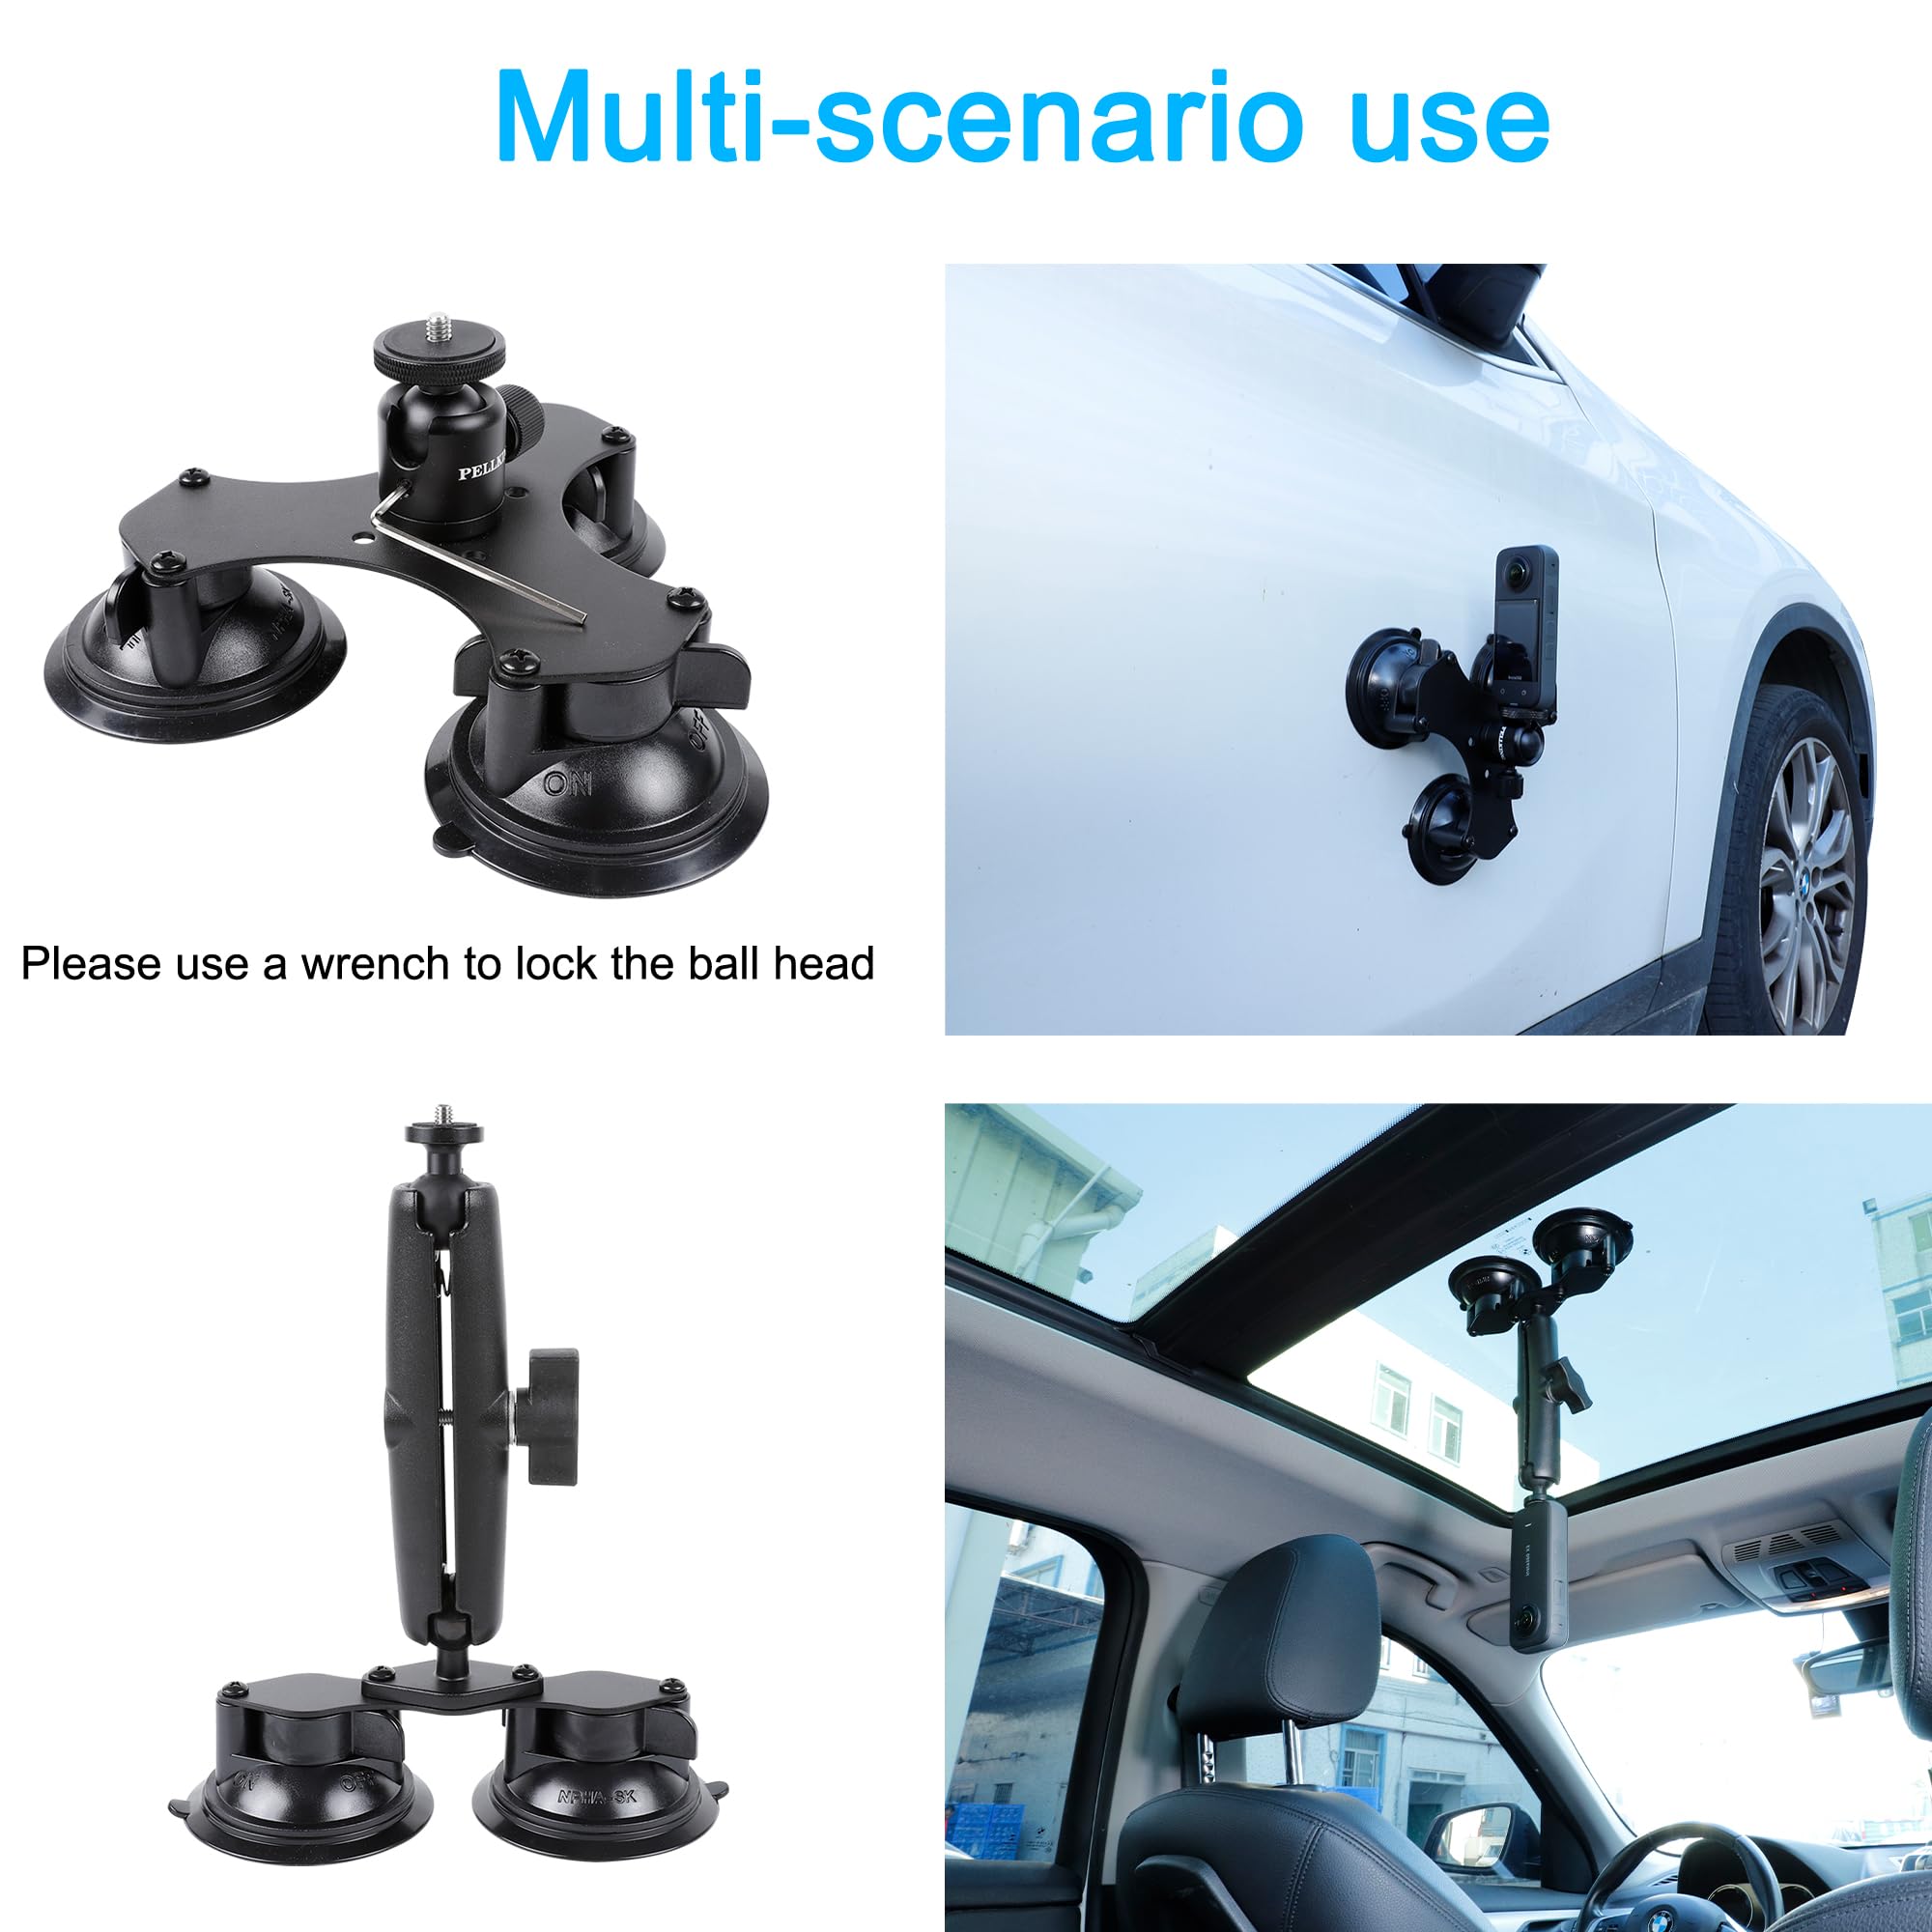 PellKing Suction Car Mount for Insta360 x4, x3, x2, x,One RS,R Compatible with GoPro Max Camera 5 in 1 Suction Mount Kit for Action Cameras (Includes 44.9-inch Selfie Stick)